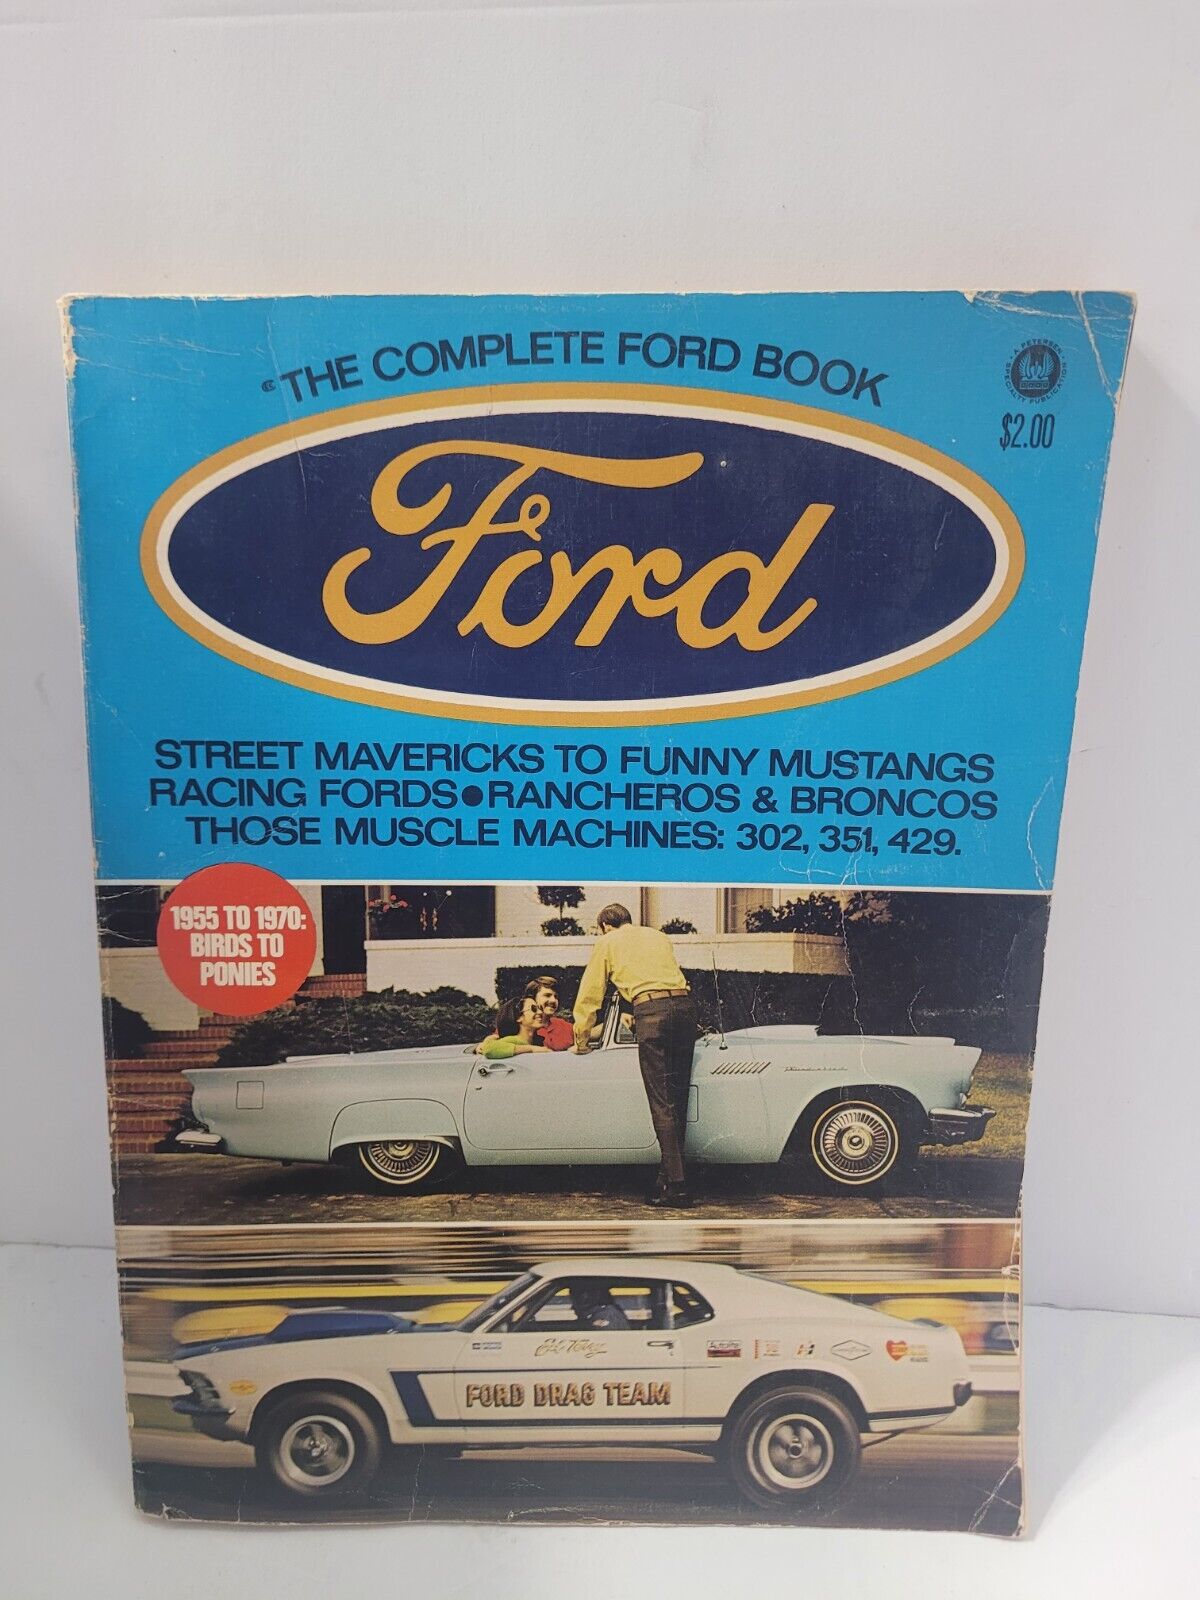 The Complete Ford Book |  Petersen 1970 | Ford history | Cars | Racing 1955-1970